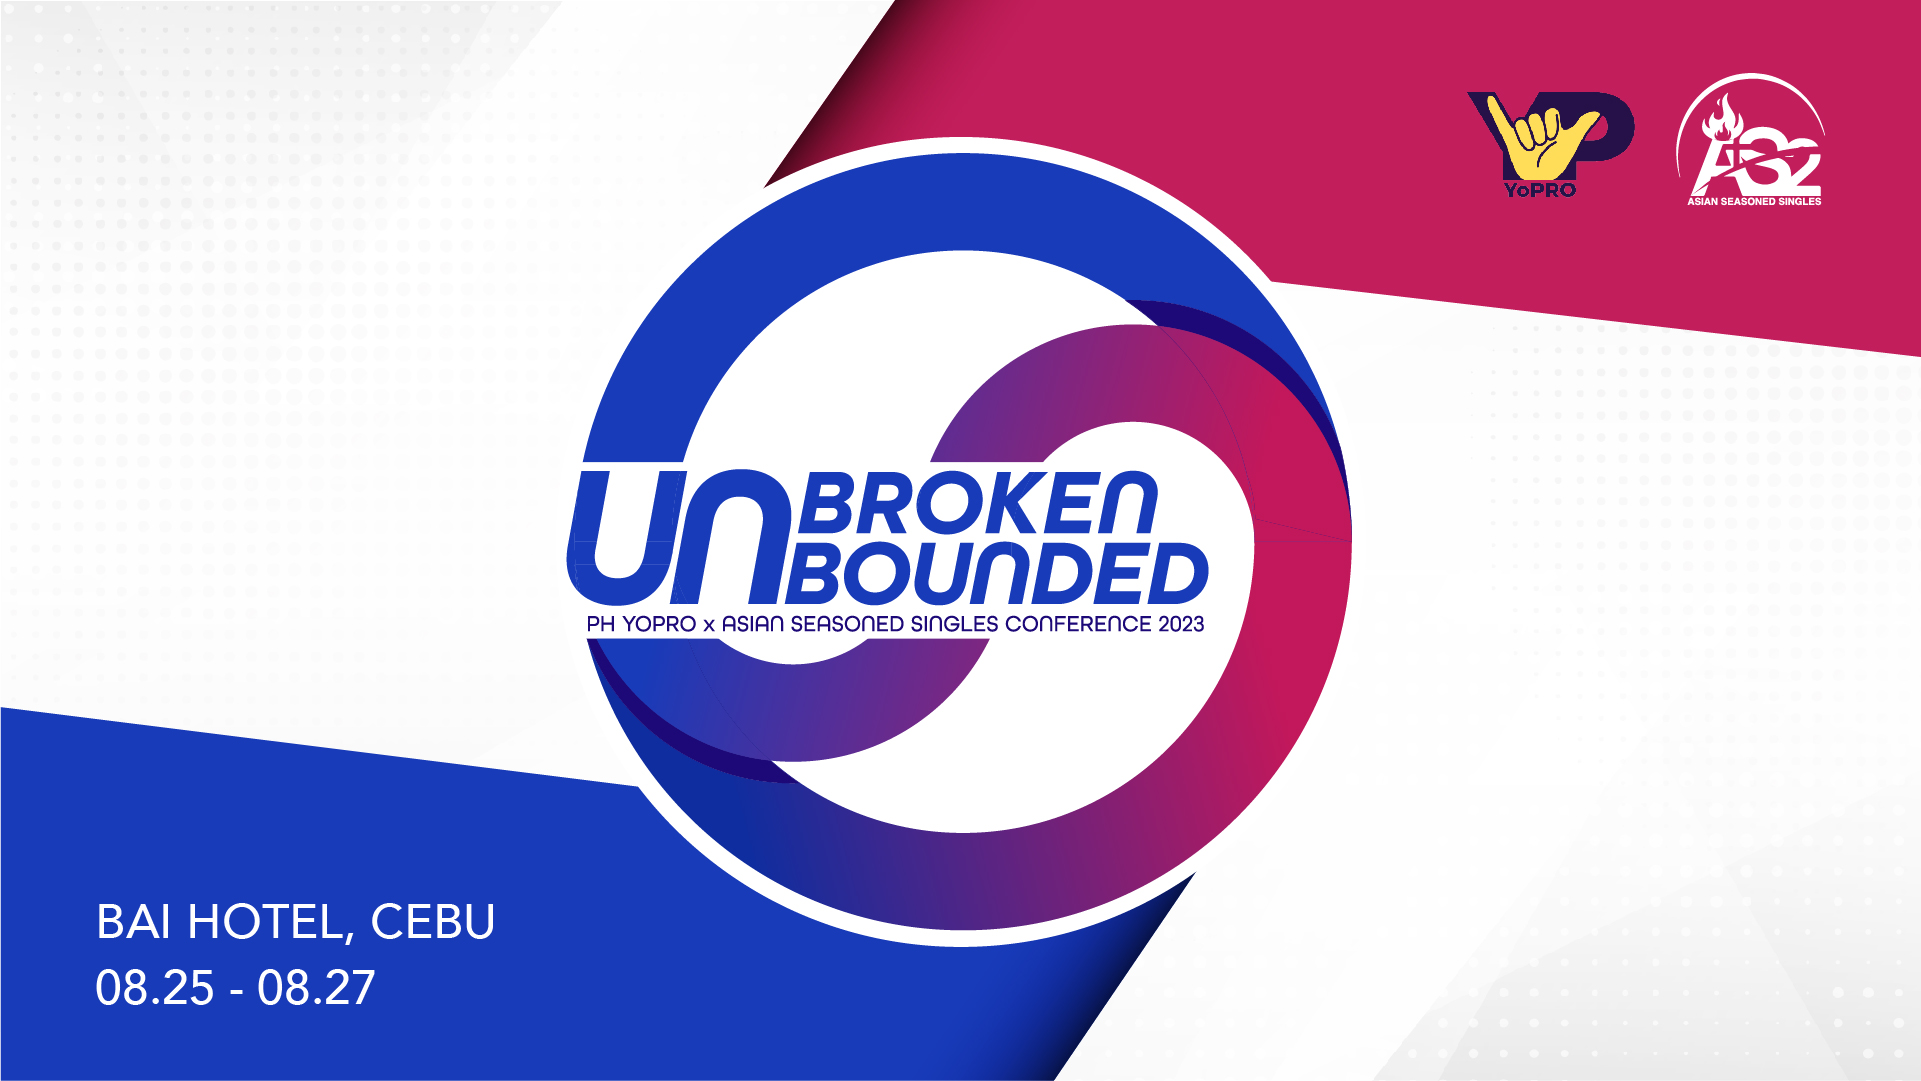 Unbroken and Unbounded: ICOC Philippines YoPro and Asian Seasoned Singles Conference Comes to Cebu